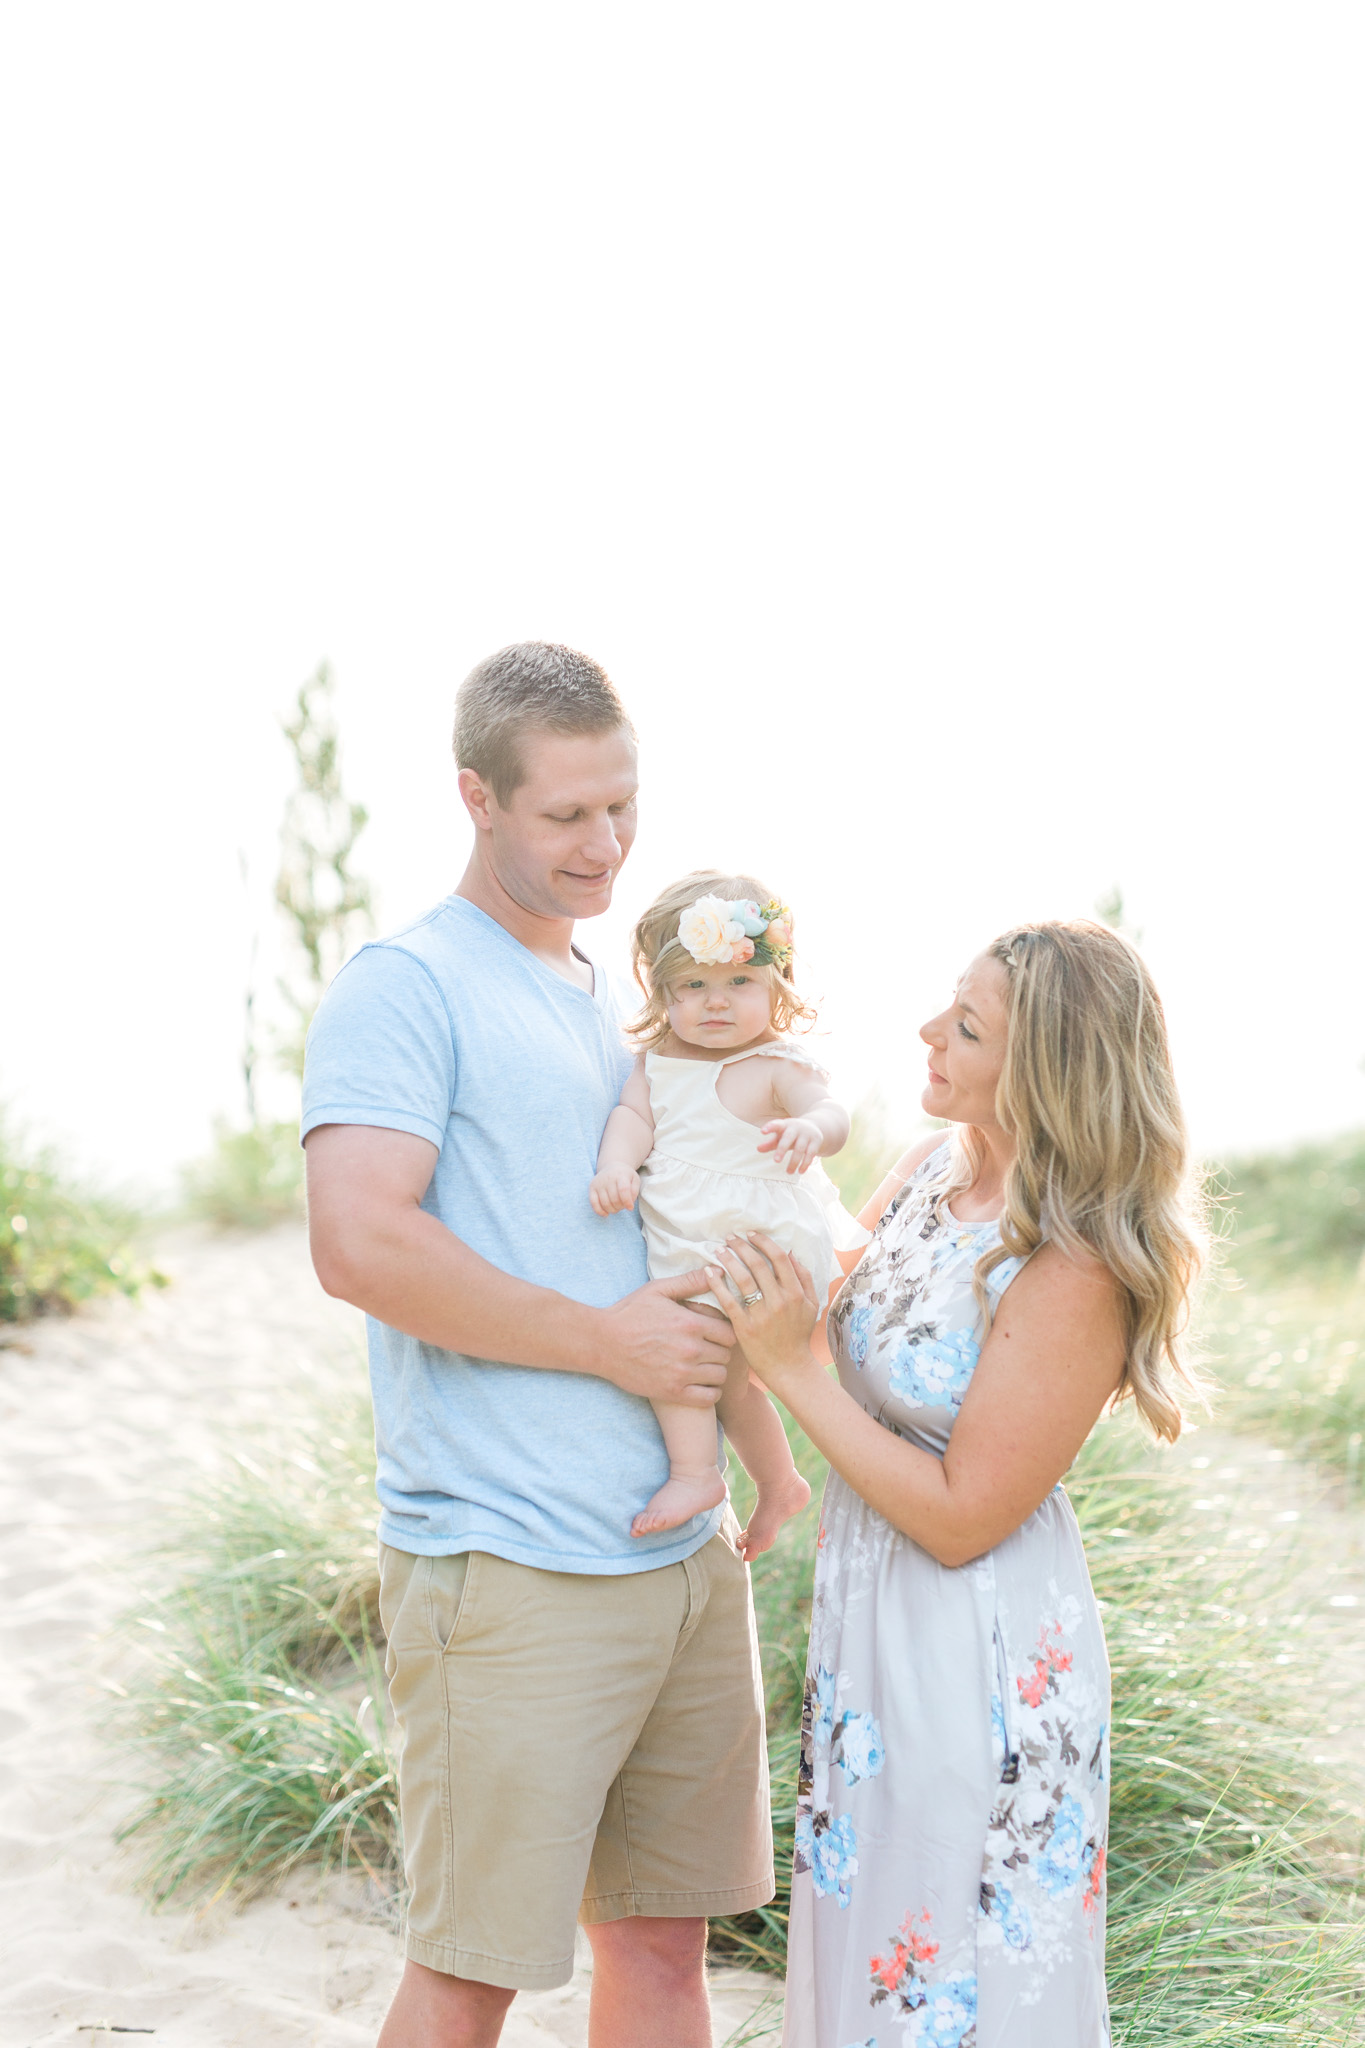 First Birthday Session on the beach | Laurenda Marie Photography | Michigan Family Photographer